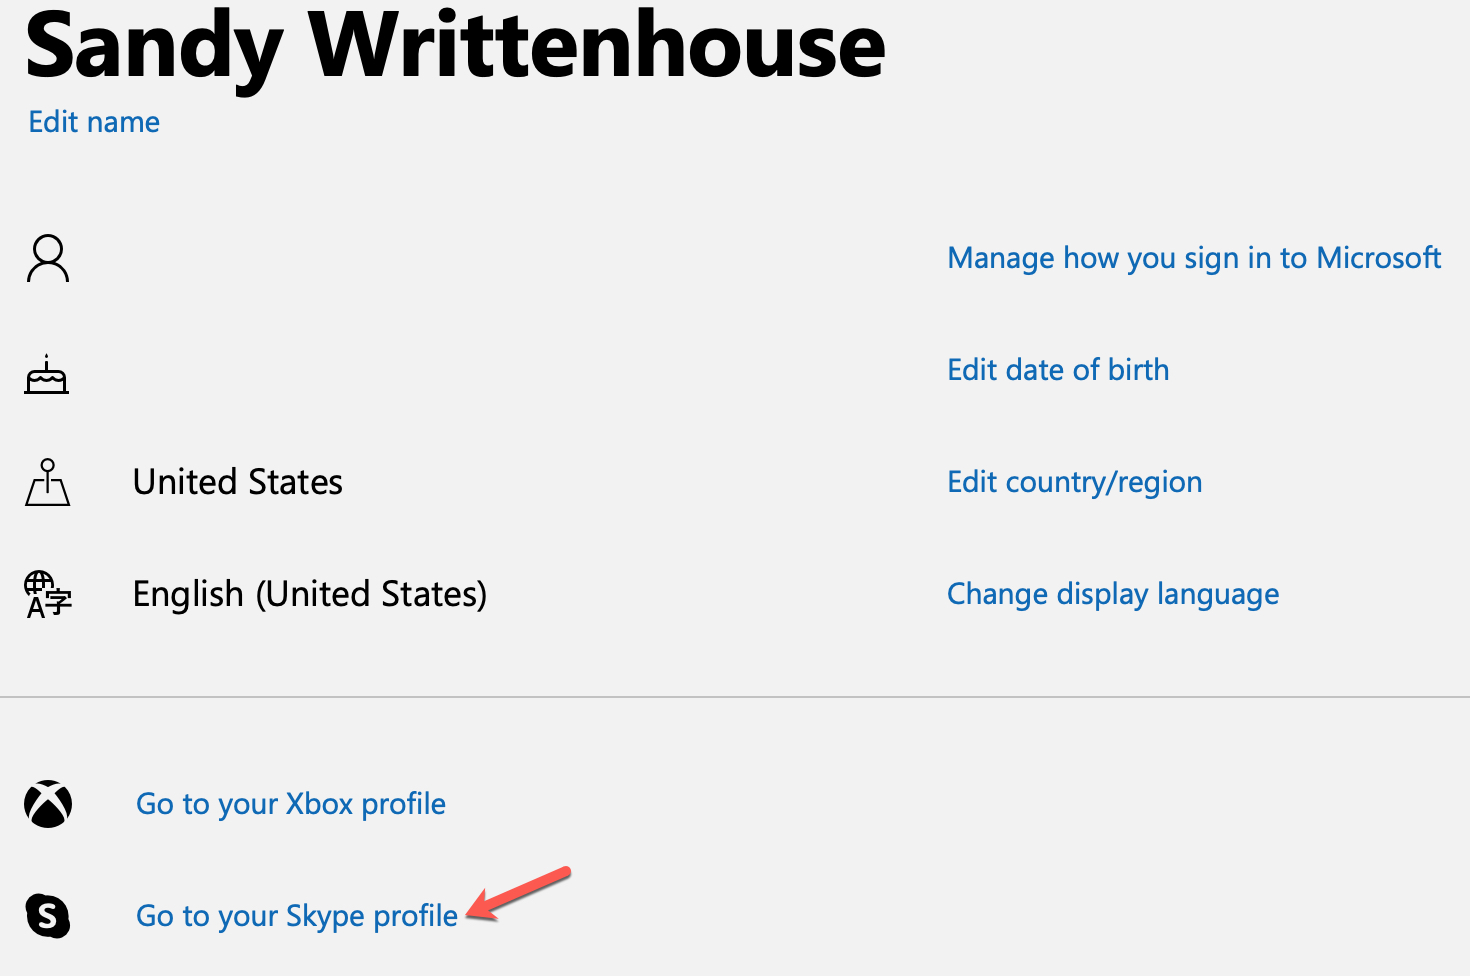 Go to your Skype profile online